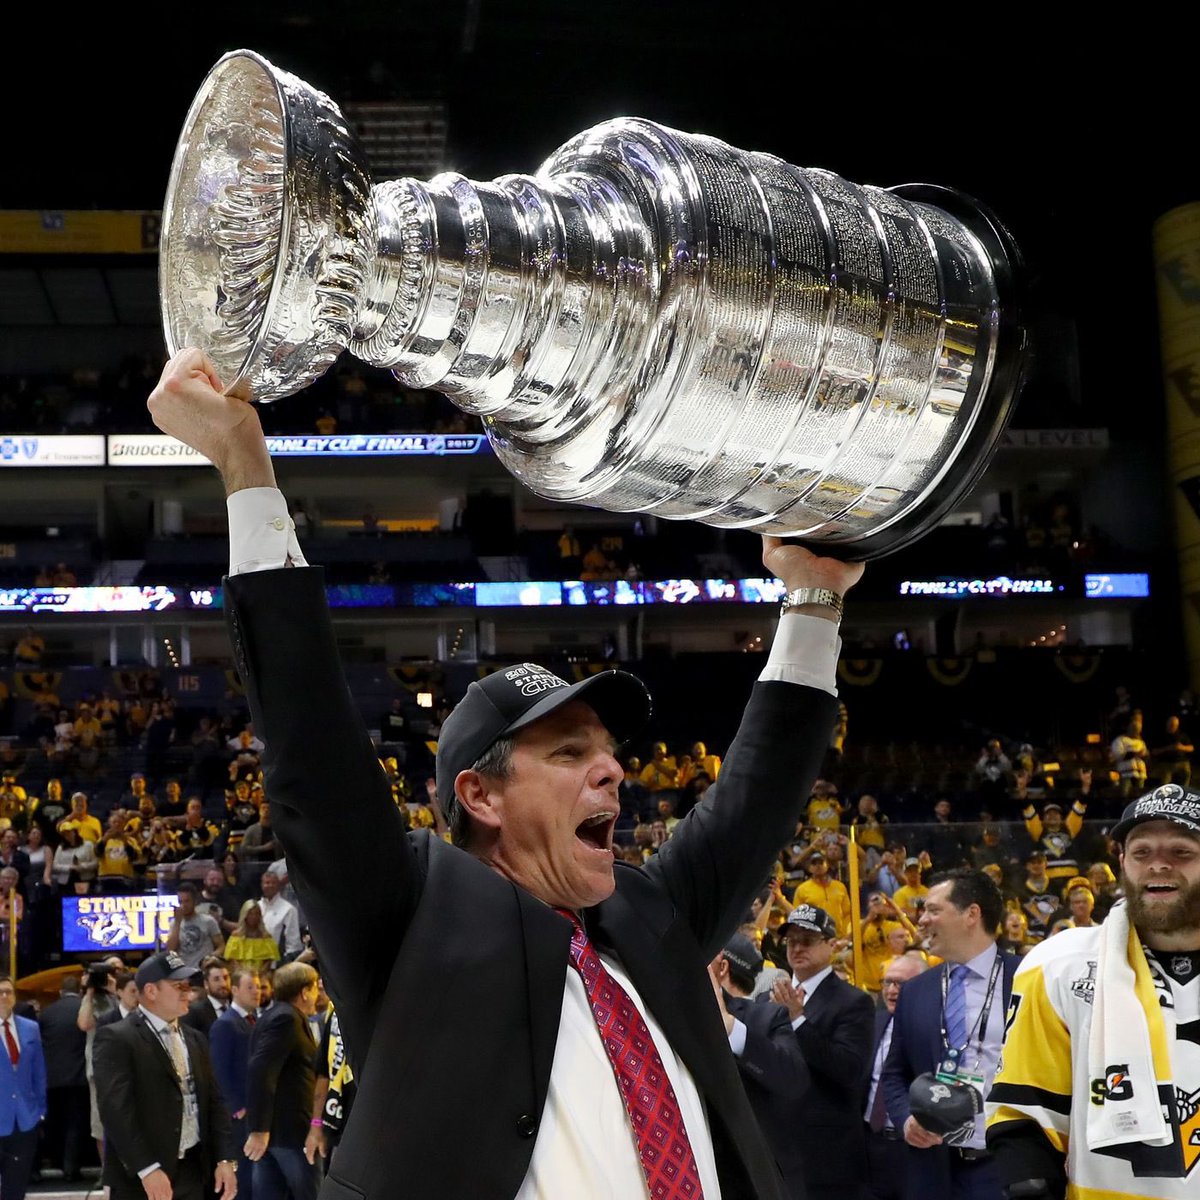 Tonight should be the last game Mike Sullivan coaches for the Pittsburgh Penguins. He changed the culture in 2015/16 which led to us winning back to back cups. He should and will be remembered as a Pittsburgh Legend but his time here has come to a end.